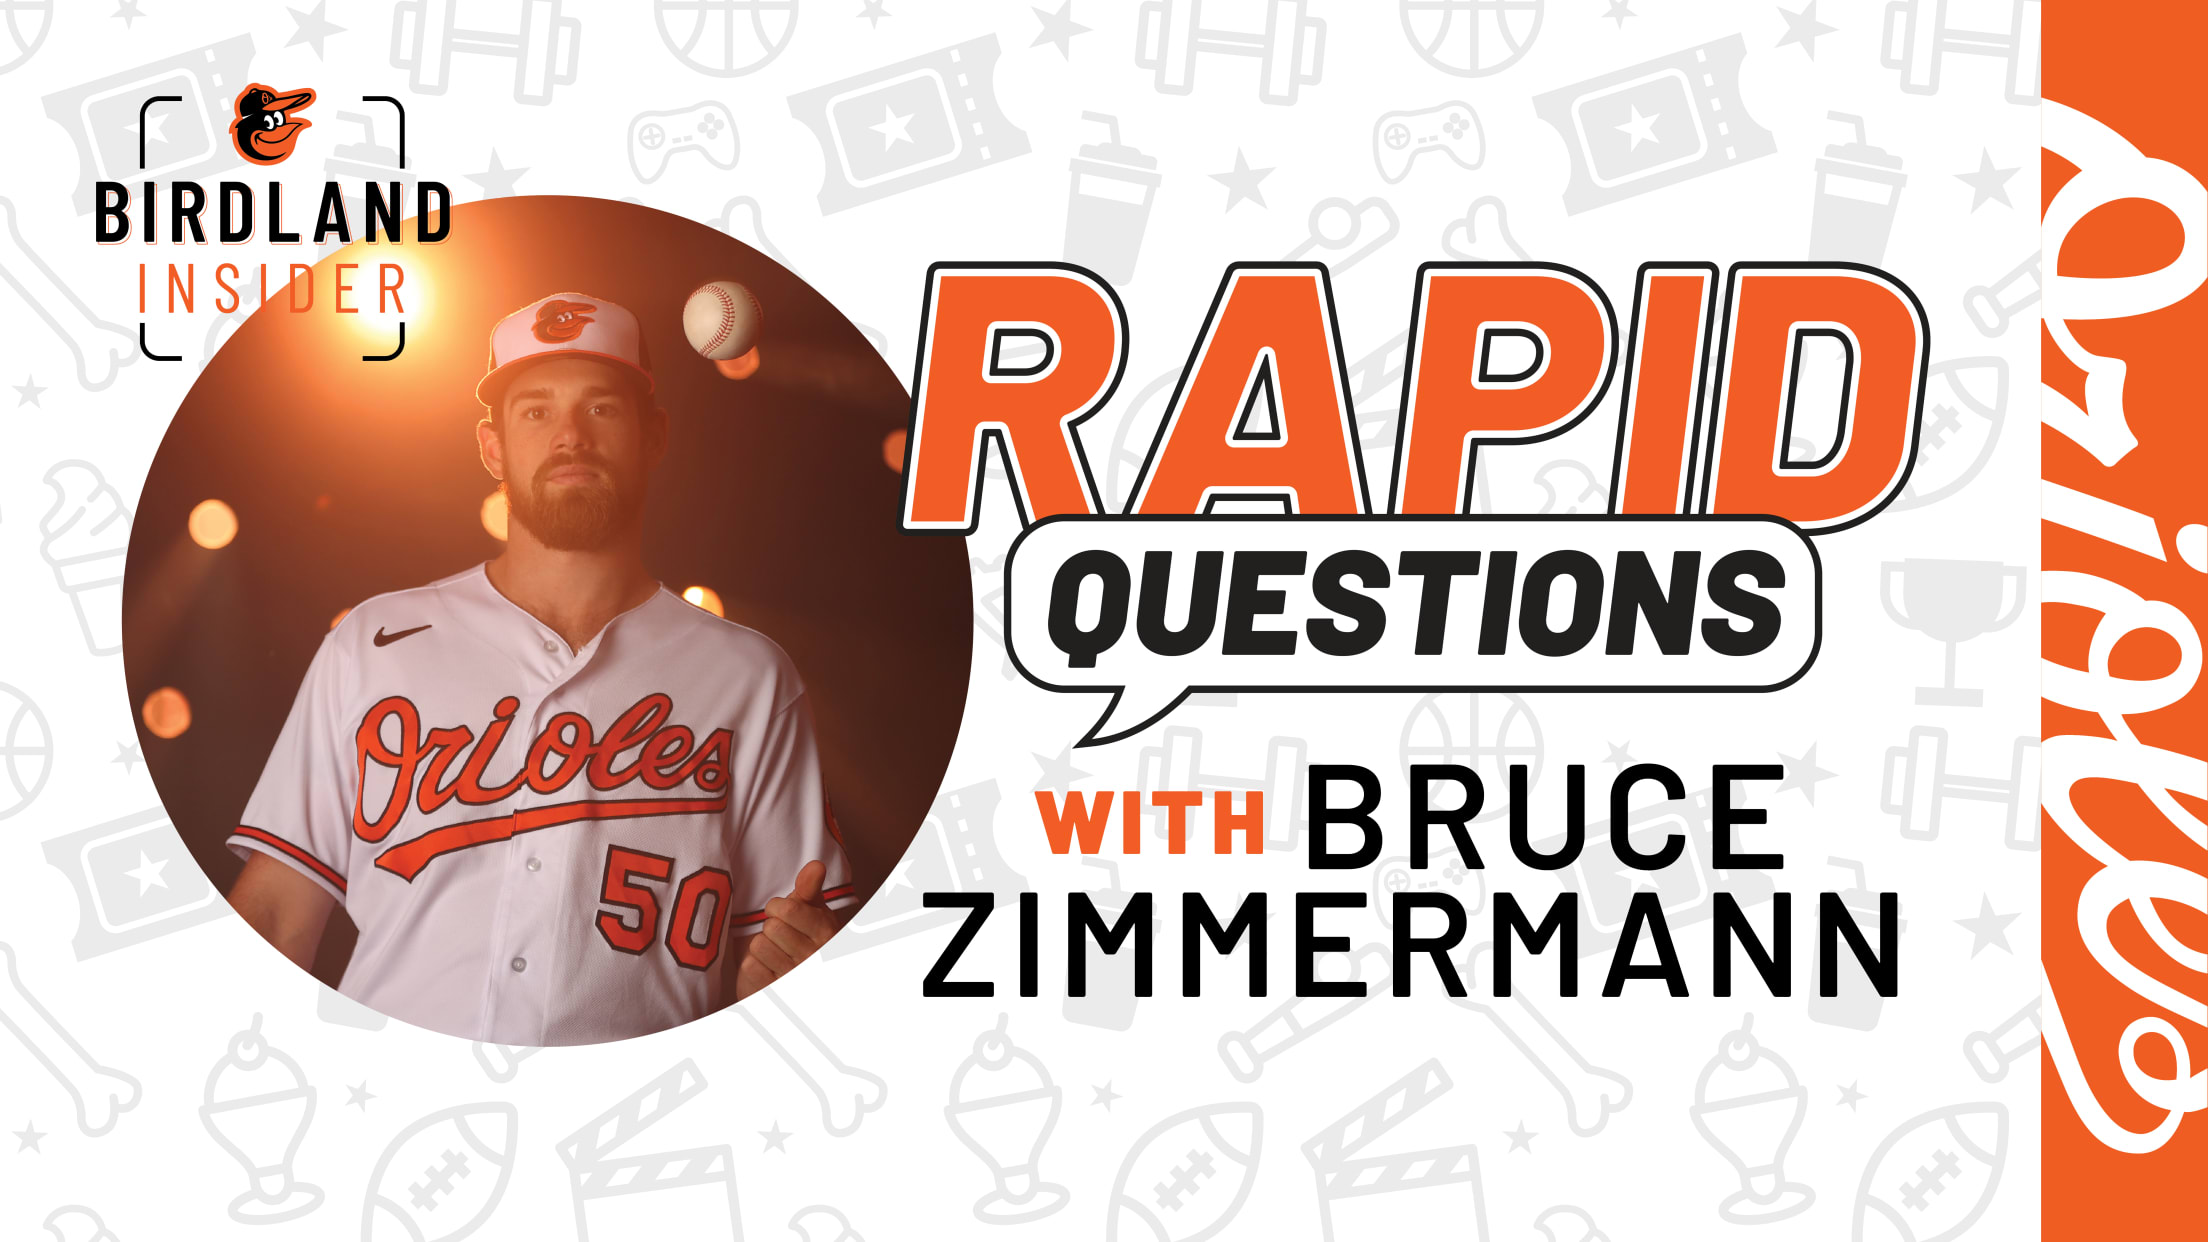 bal-rapid-questions-with-bruce-zimmermann-header